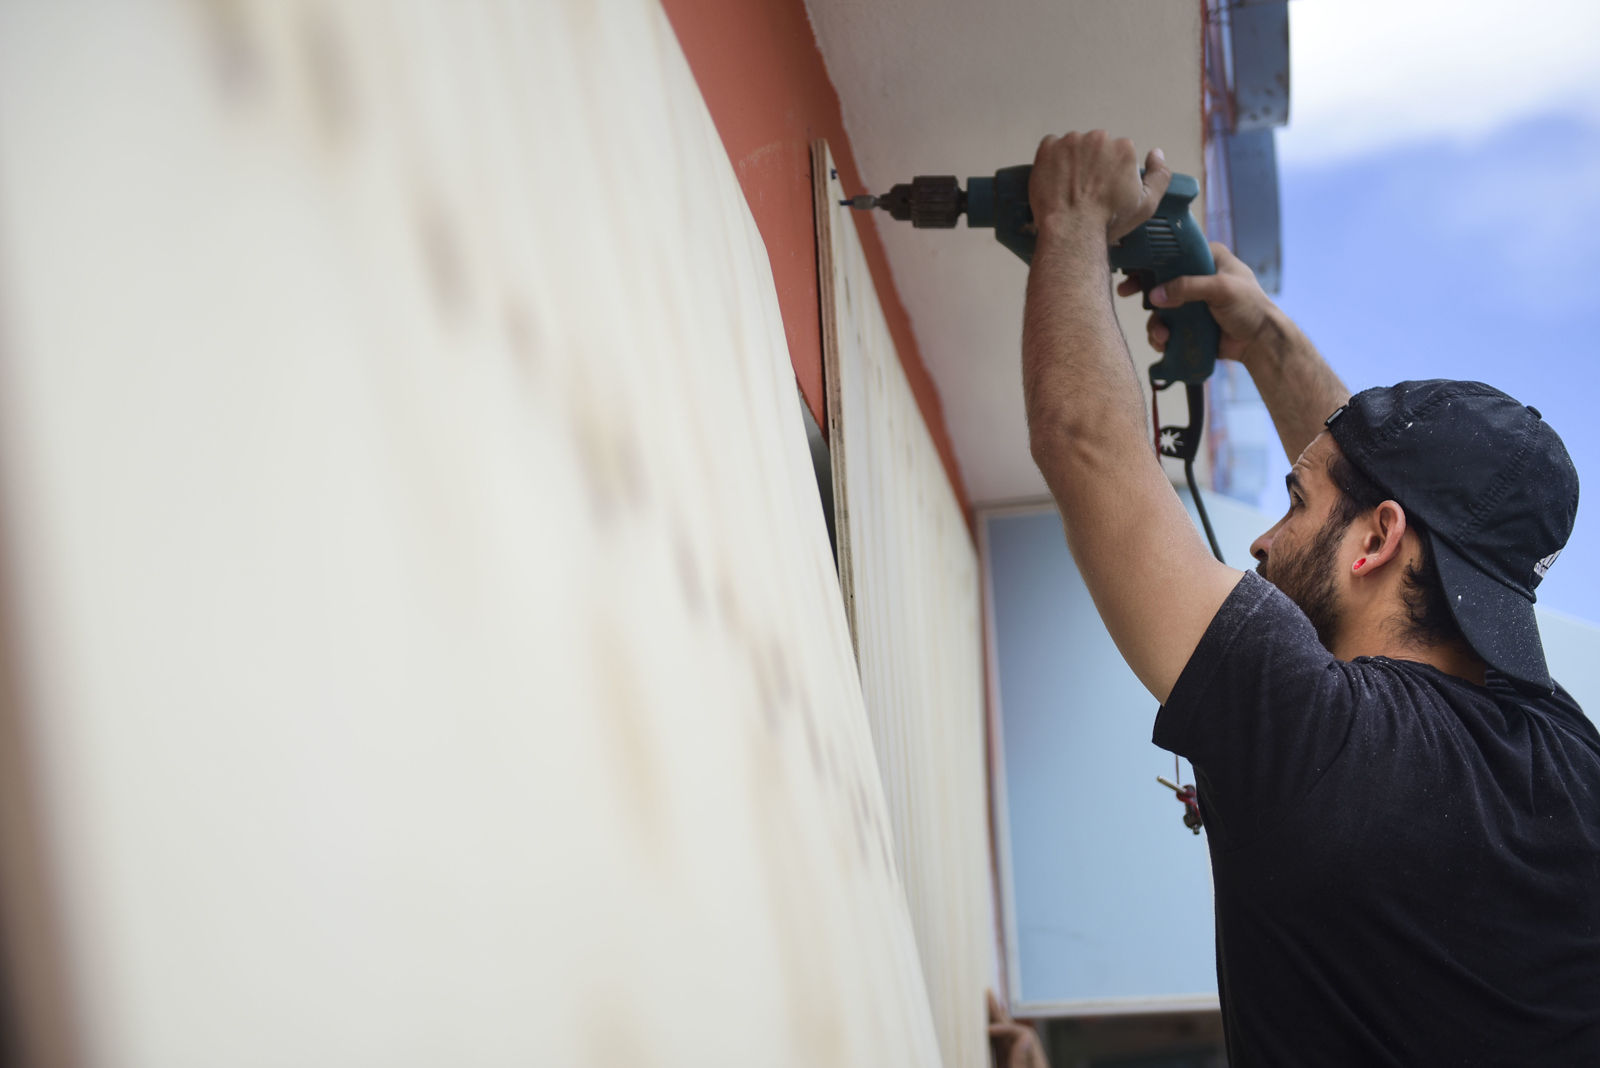 Cyber School Supply employee Christopher Rodriguez installs wood panels on windows in preparation for Hurricane Irma, in Toa Baja, Puerto Rico, Tuesday, Sept. 5, 2017. Irma grew into a dangerous Category 5 storm, the most powerful seen in the Atlantic in over a decade, and roared toward islands in the northeast Caribbean Tuesday. (AP Photo/Carlos Giusti)